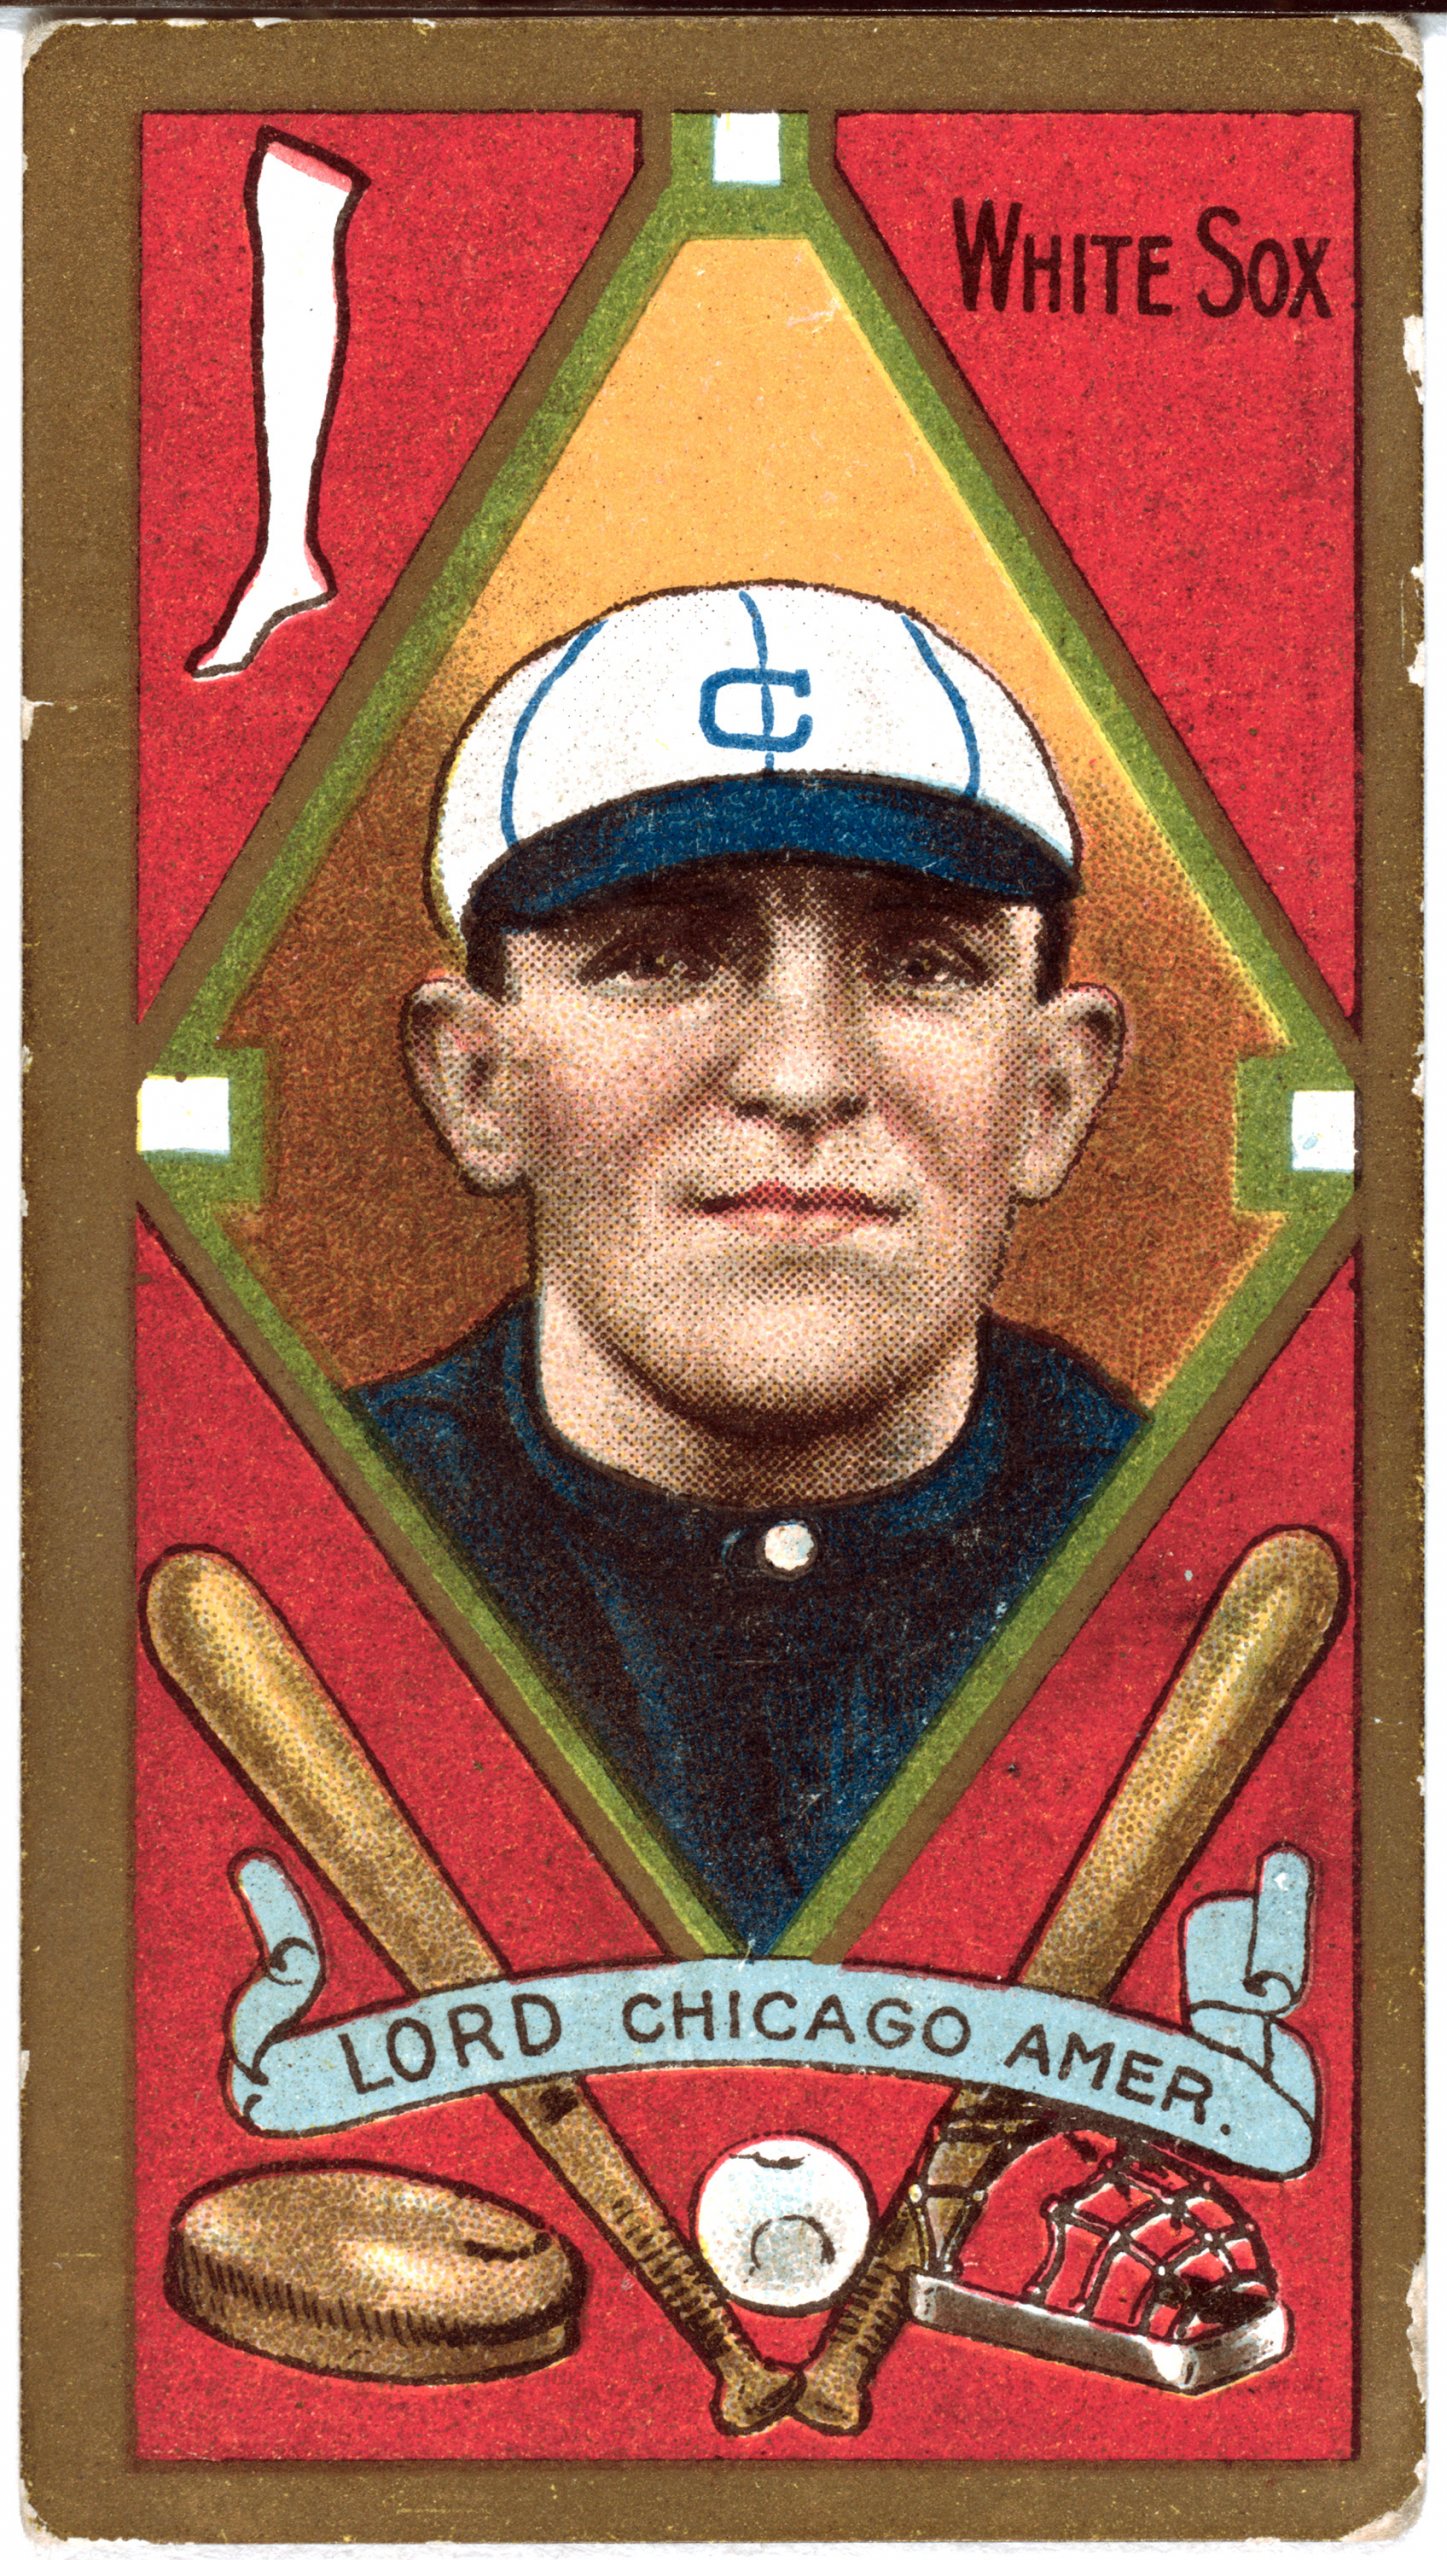 http://hdl.loc.gov/loc.pnp/bbc.1467fTitle: [Harry D. Lord, Chicago White Sox, baseball card portrait]Other Title: Card set: Gold Borders (T205)Related Names: American Tobacco Company , sponsorDate Created/Published: 1911.Medium: 1 photomechanical print.Reproduction Number: LC-DIG-bbc-1467f (digital file from original, front) LC-DIG-bbc-1467b (digital file from original, back)Rights Advisory: No known restrictions on publication.Access Advisory: Restricted access: Materials in this collection are extremely fragile and cannot be served.Call Number: LOT 13163-25, no. 125 [P&P]Repository: Library of Congress Prints and Photographs Division Washington, D.C. 20540 USA http://hdl.loc.gov/loc.pnp/pp.printNotes:Baseball card title devised by Library staff.Issued by: American Tobacco Company.Forms part of: Baseball cards from the Benjamin K. Edwards Collection.Subjects:Lord, Harry (Team member)Chicago White SoxChicagoAmerican Leaguethird basemanFormat:Baseball cards--1910-1920.Photomechanical prints--1910-1920.Collections:Baseball CardsPart of: Baseball cards from the Benjamin K. Edwards CollectionBookmark This Record: https://www.loc.gov/pictures/item/2008677435/